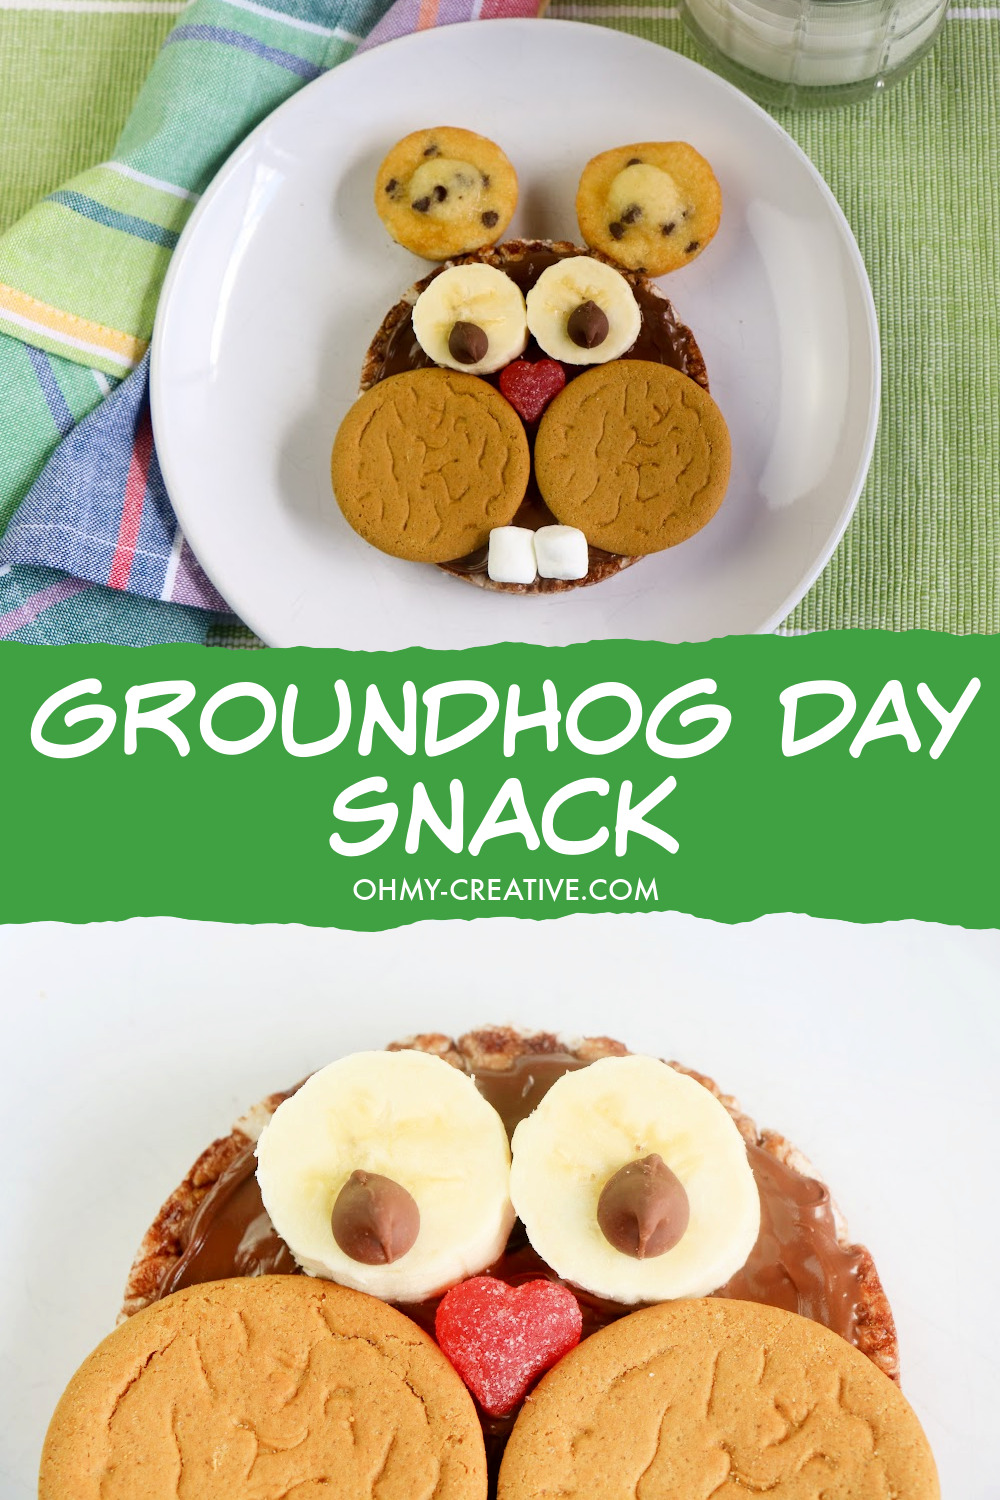 An adorable ground hog snack made with a chocolate rice cake and other treats.